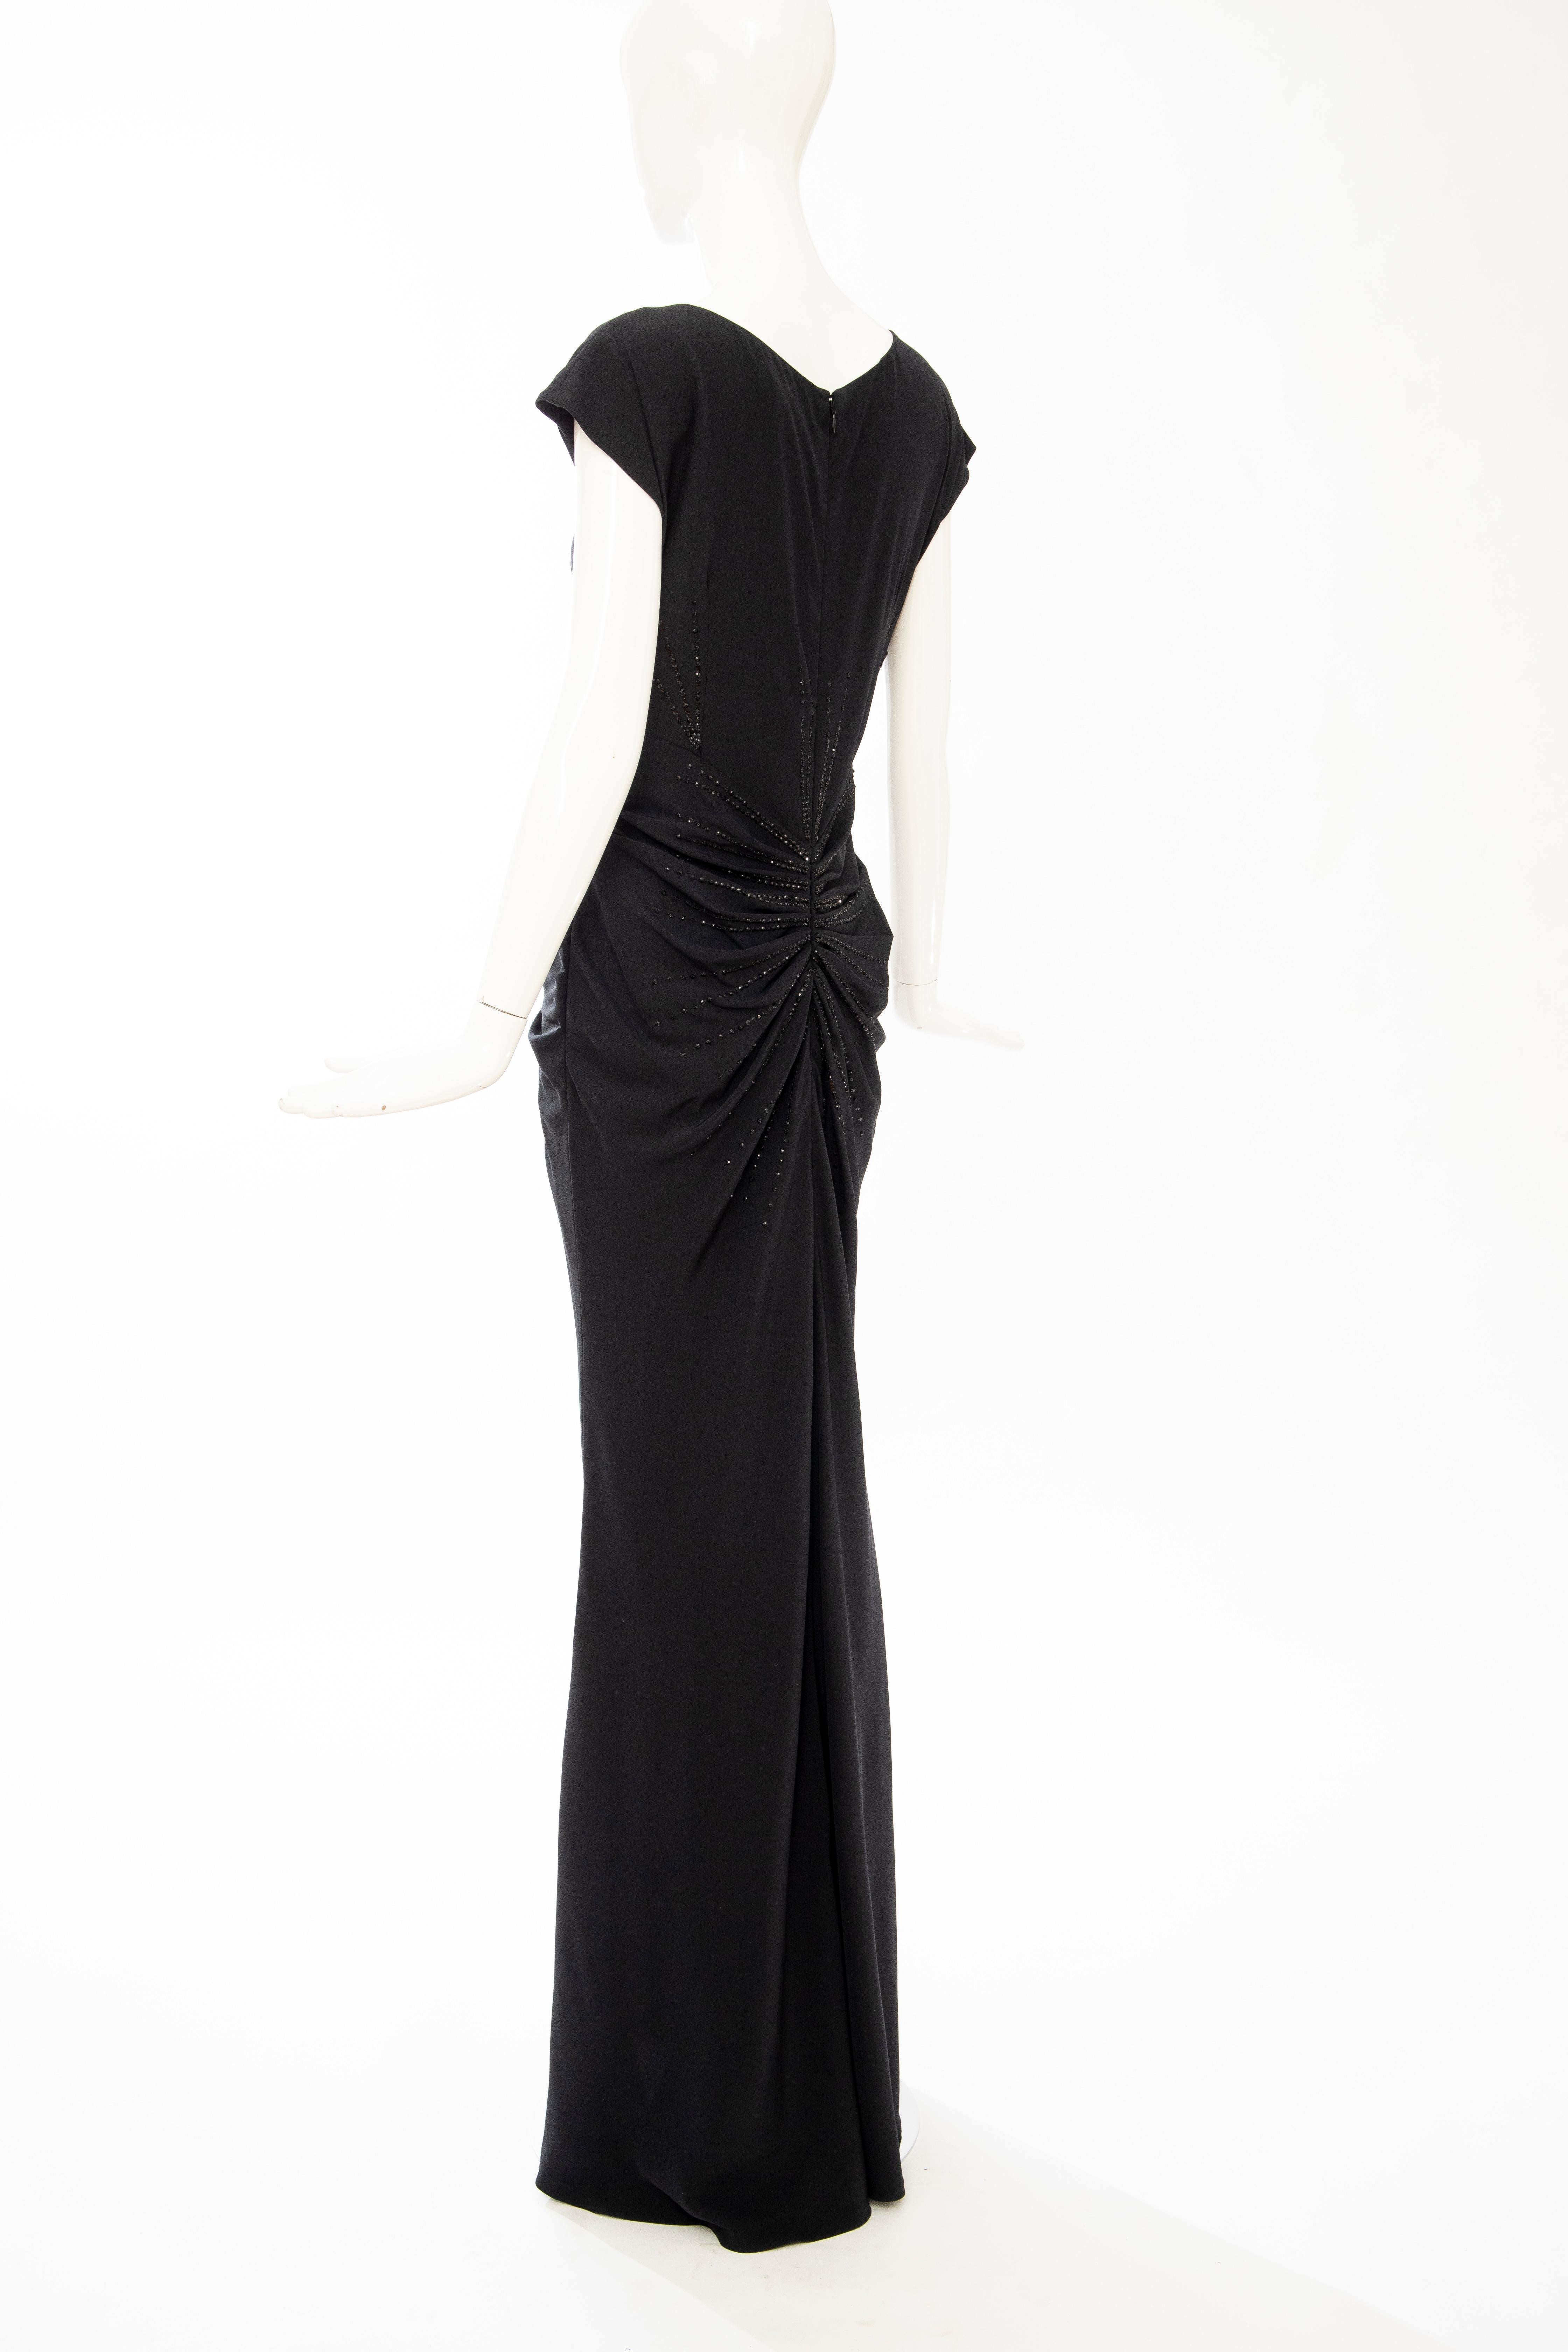 John Galliano for Christian Dior Black Embroidered Evening Dress, Spring 2008 7